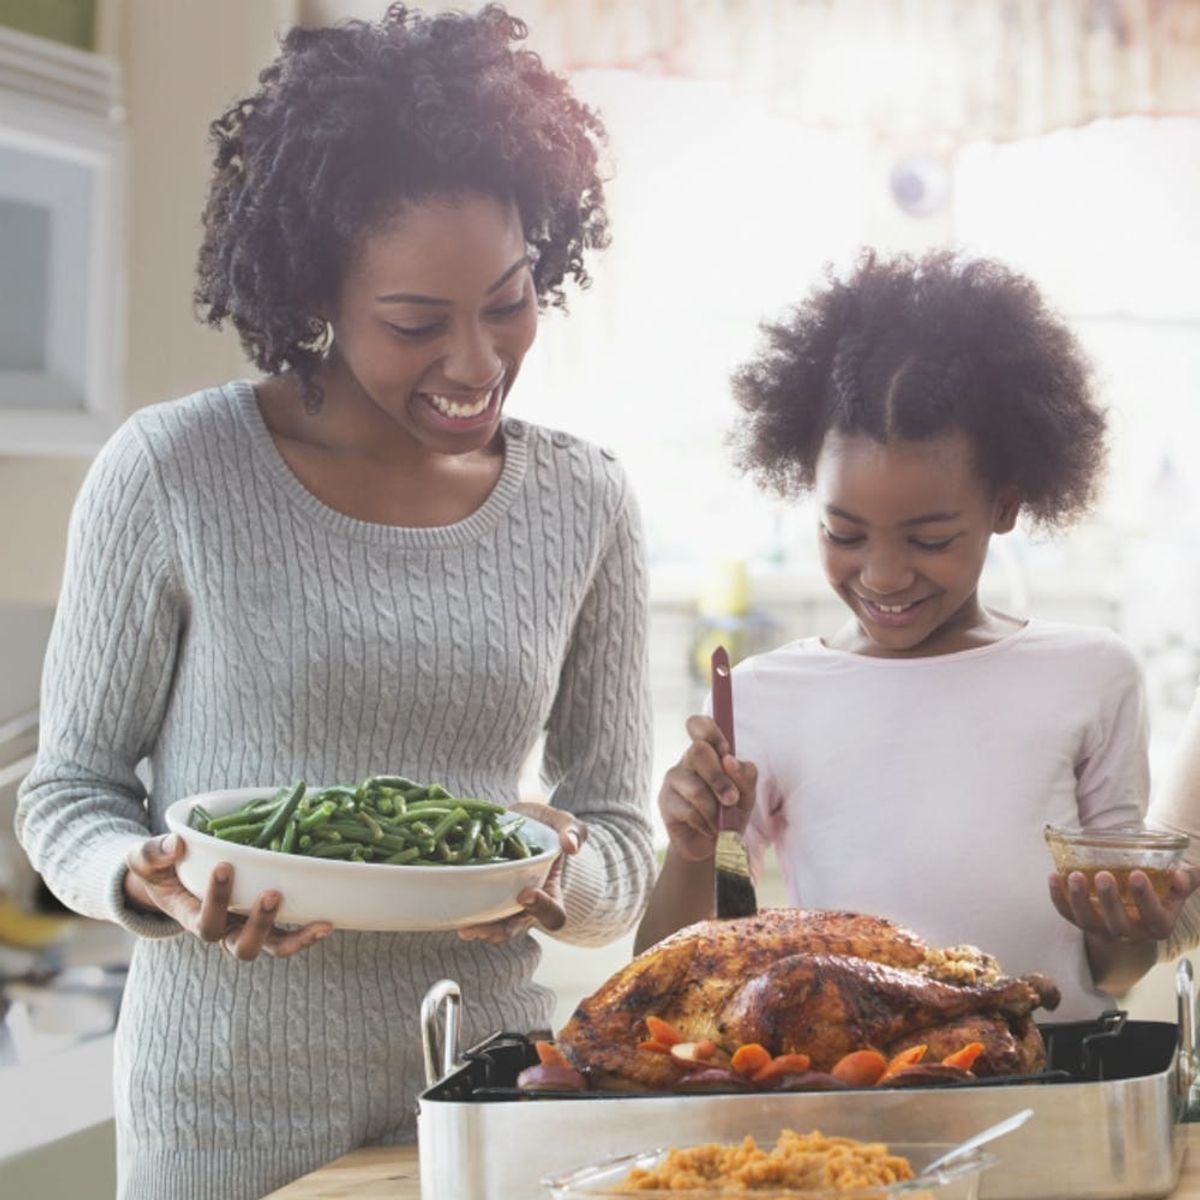 A Two-Step Guide for How to Eat Guilt-Free This Thanksgiving